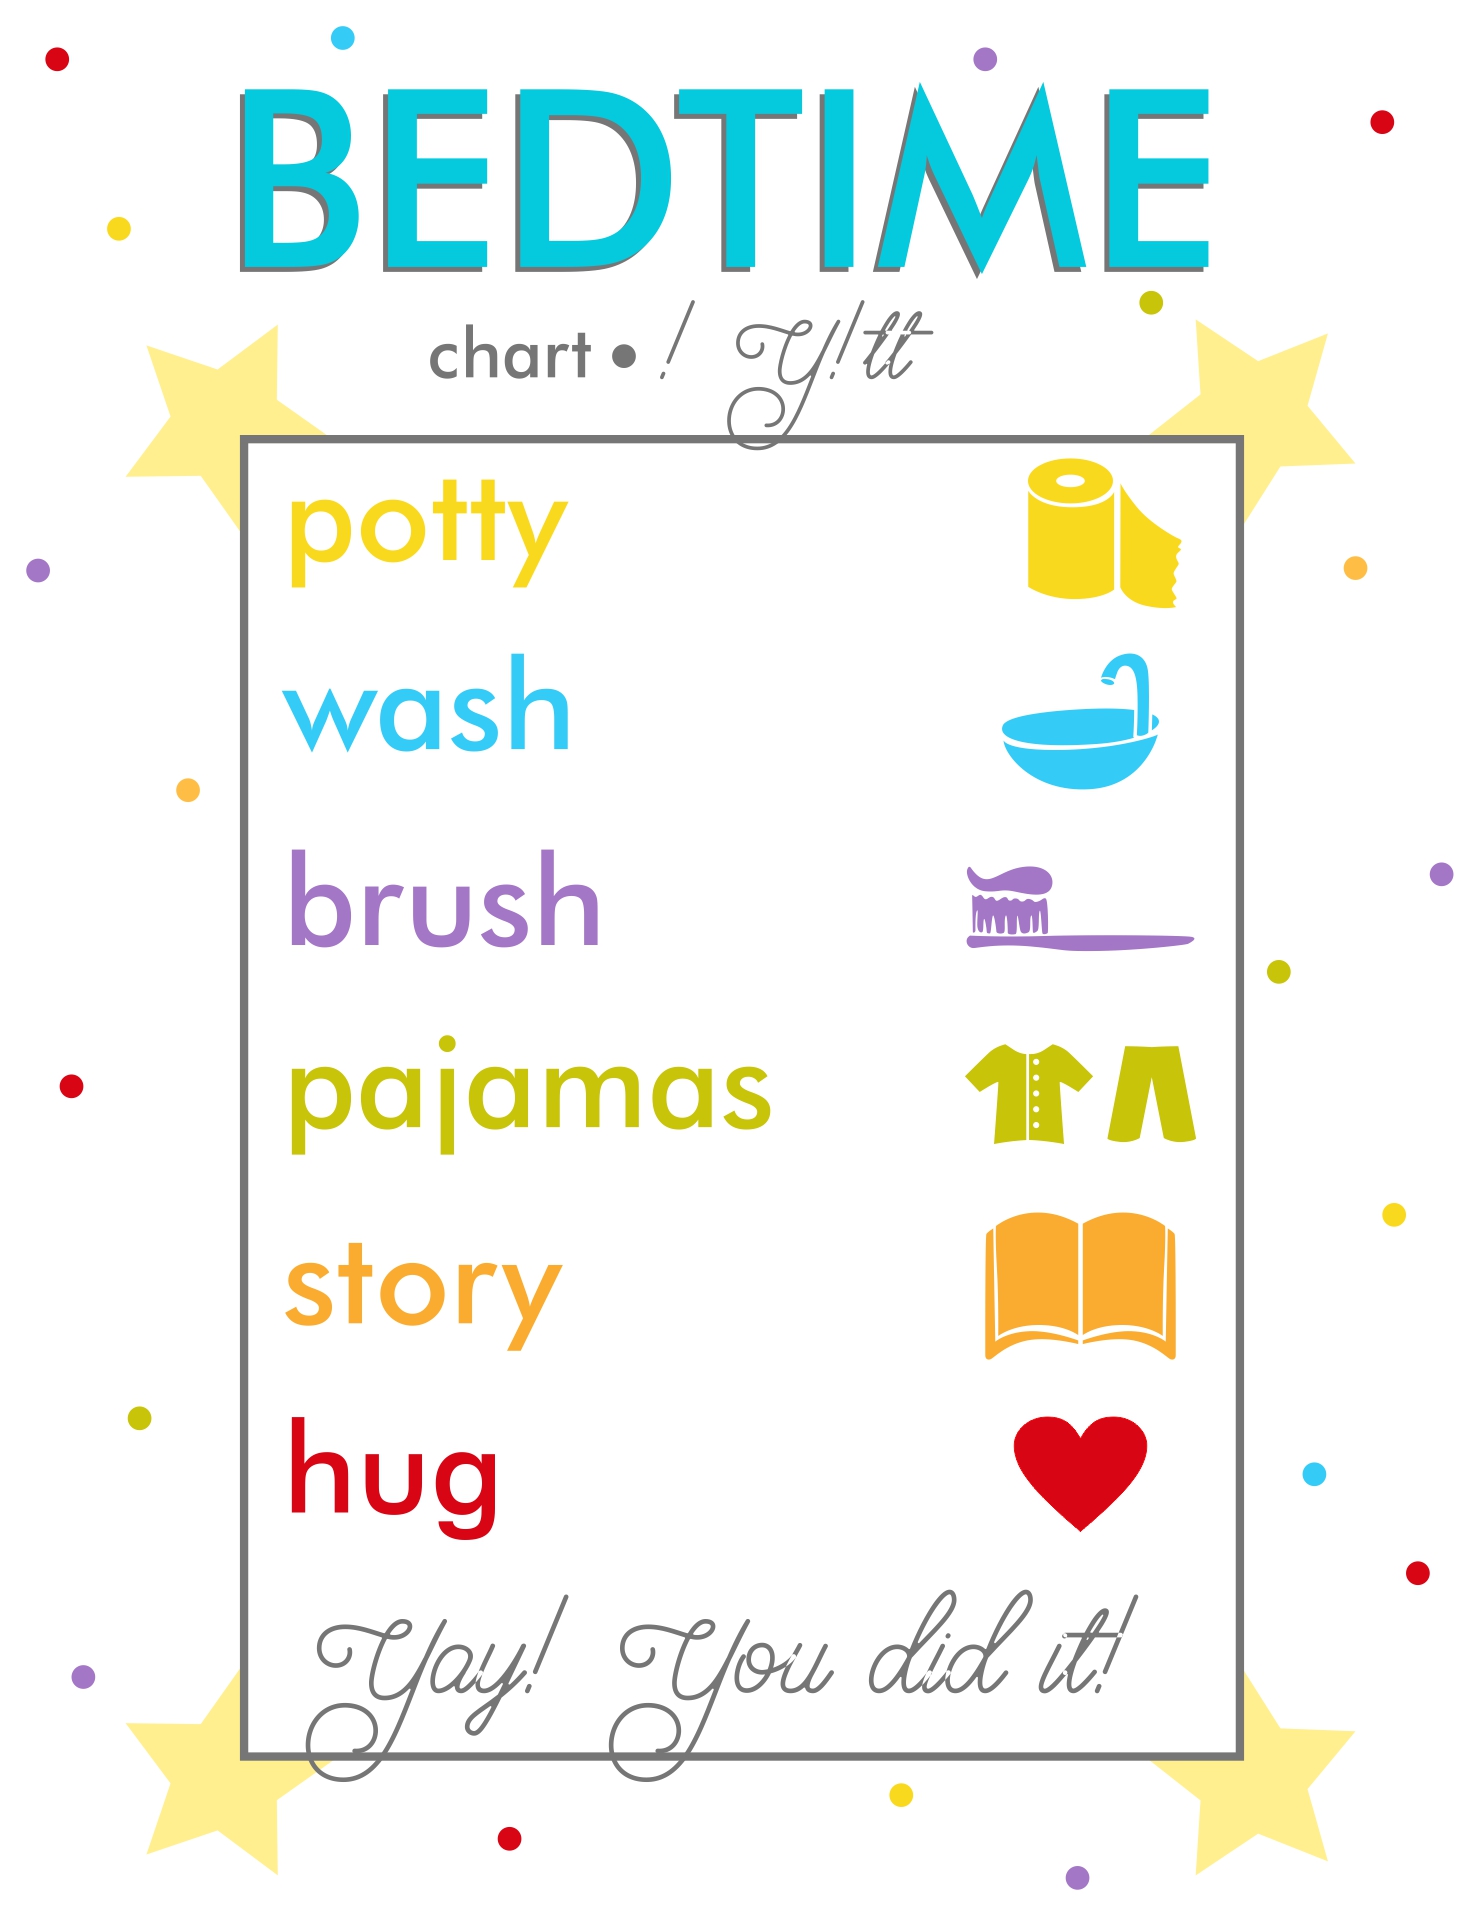 Bedtime Routine Chart for Toddlers